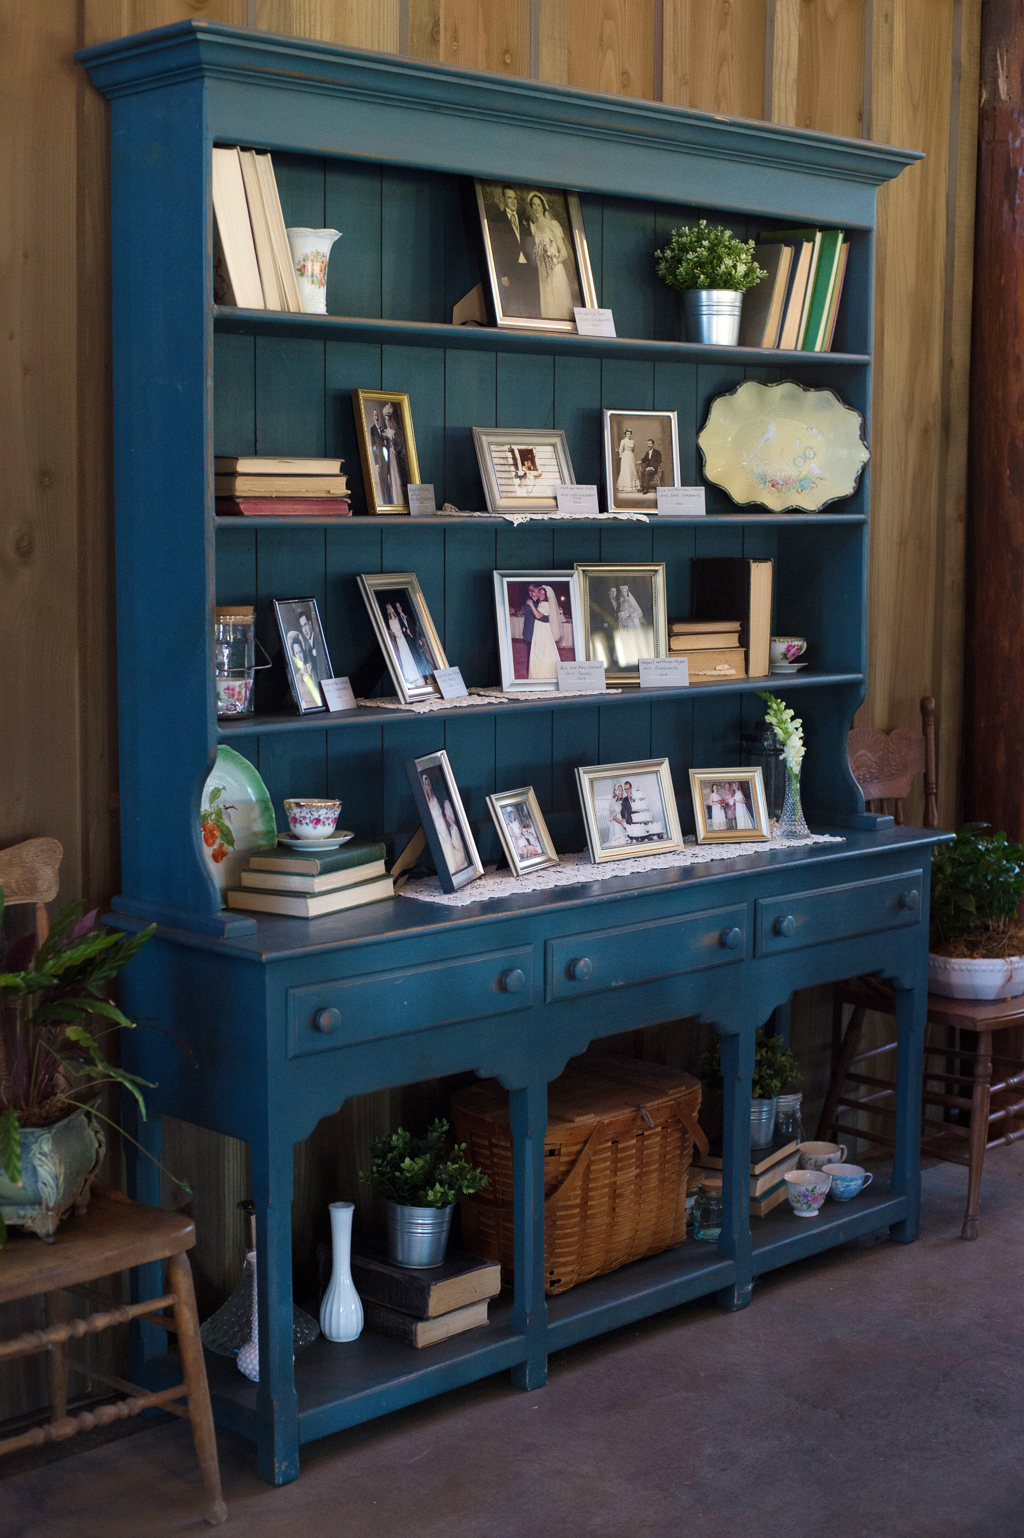 an old antique shelf painted blue holds old family photos in frames